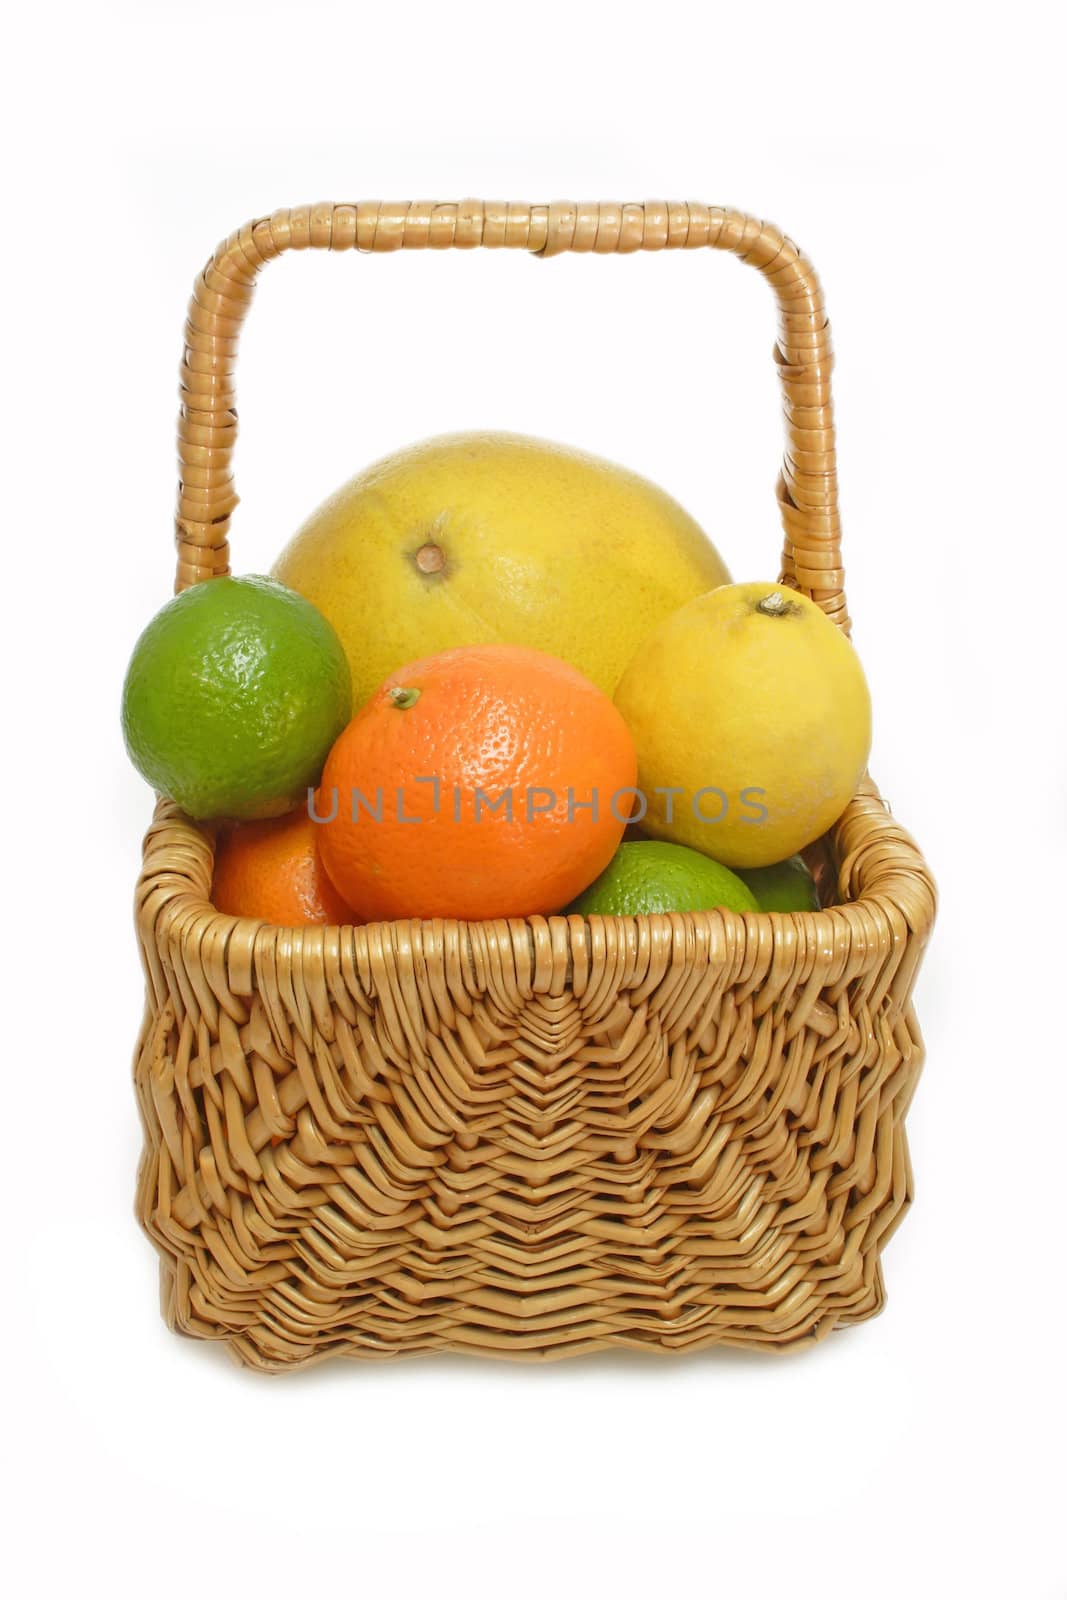 Basket with fruits by Teamarbeit